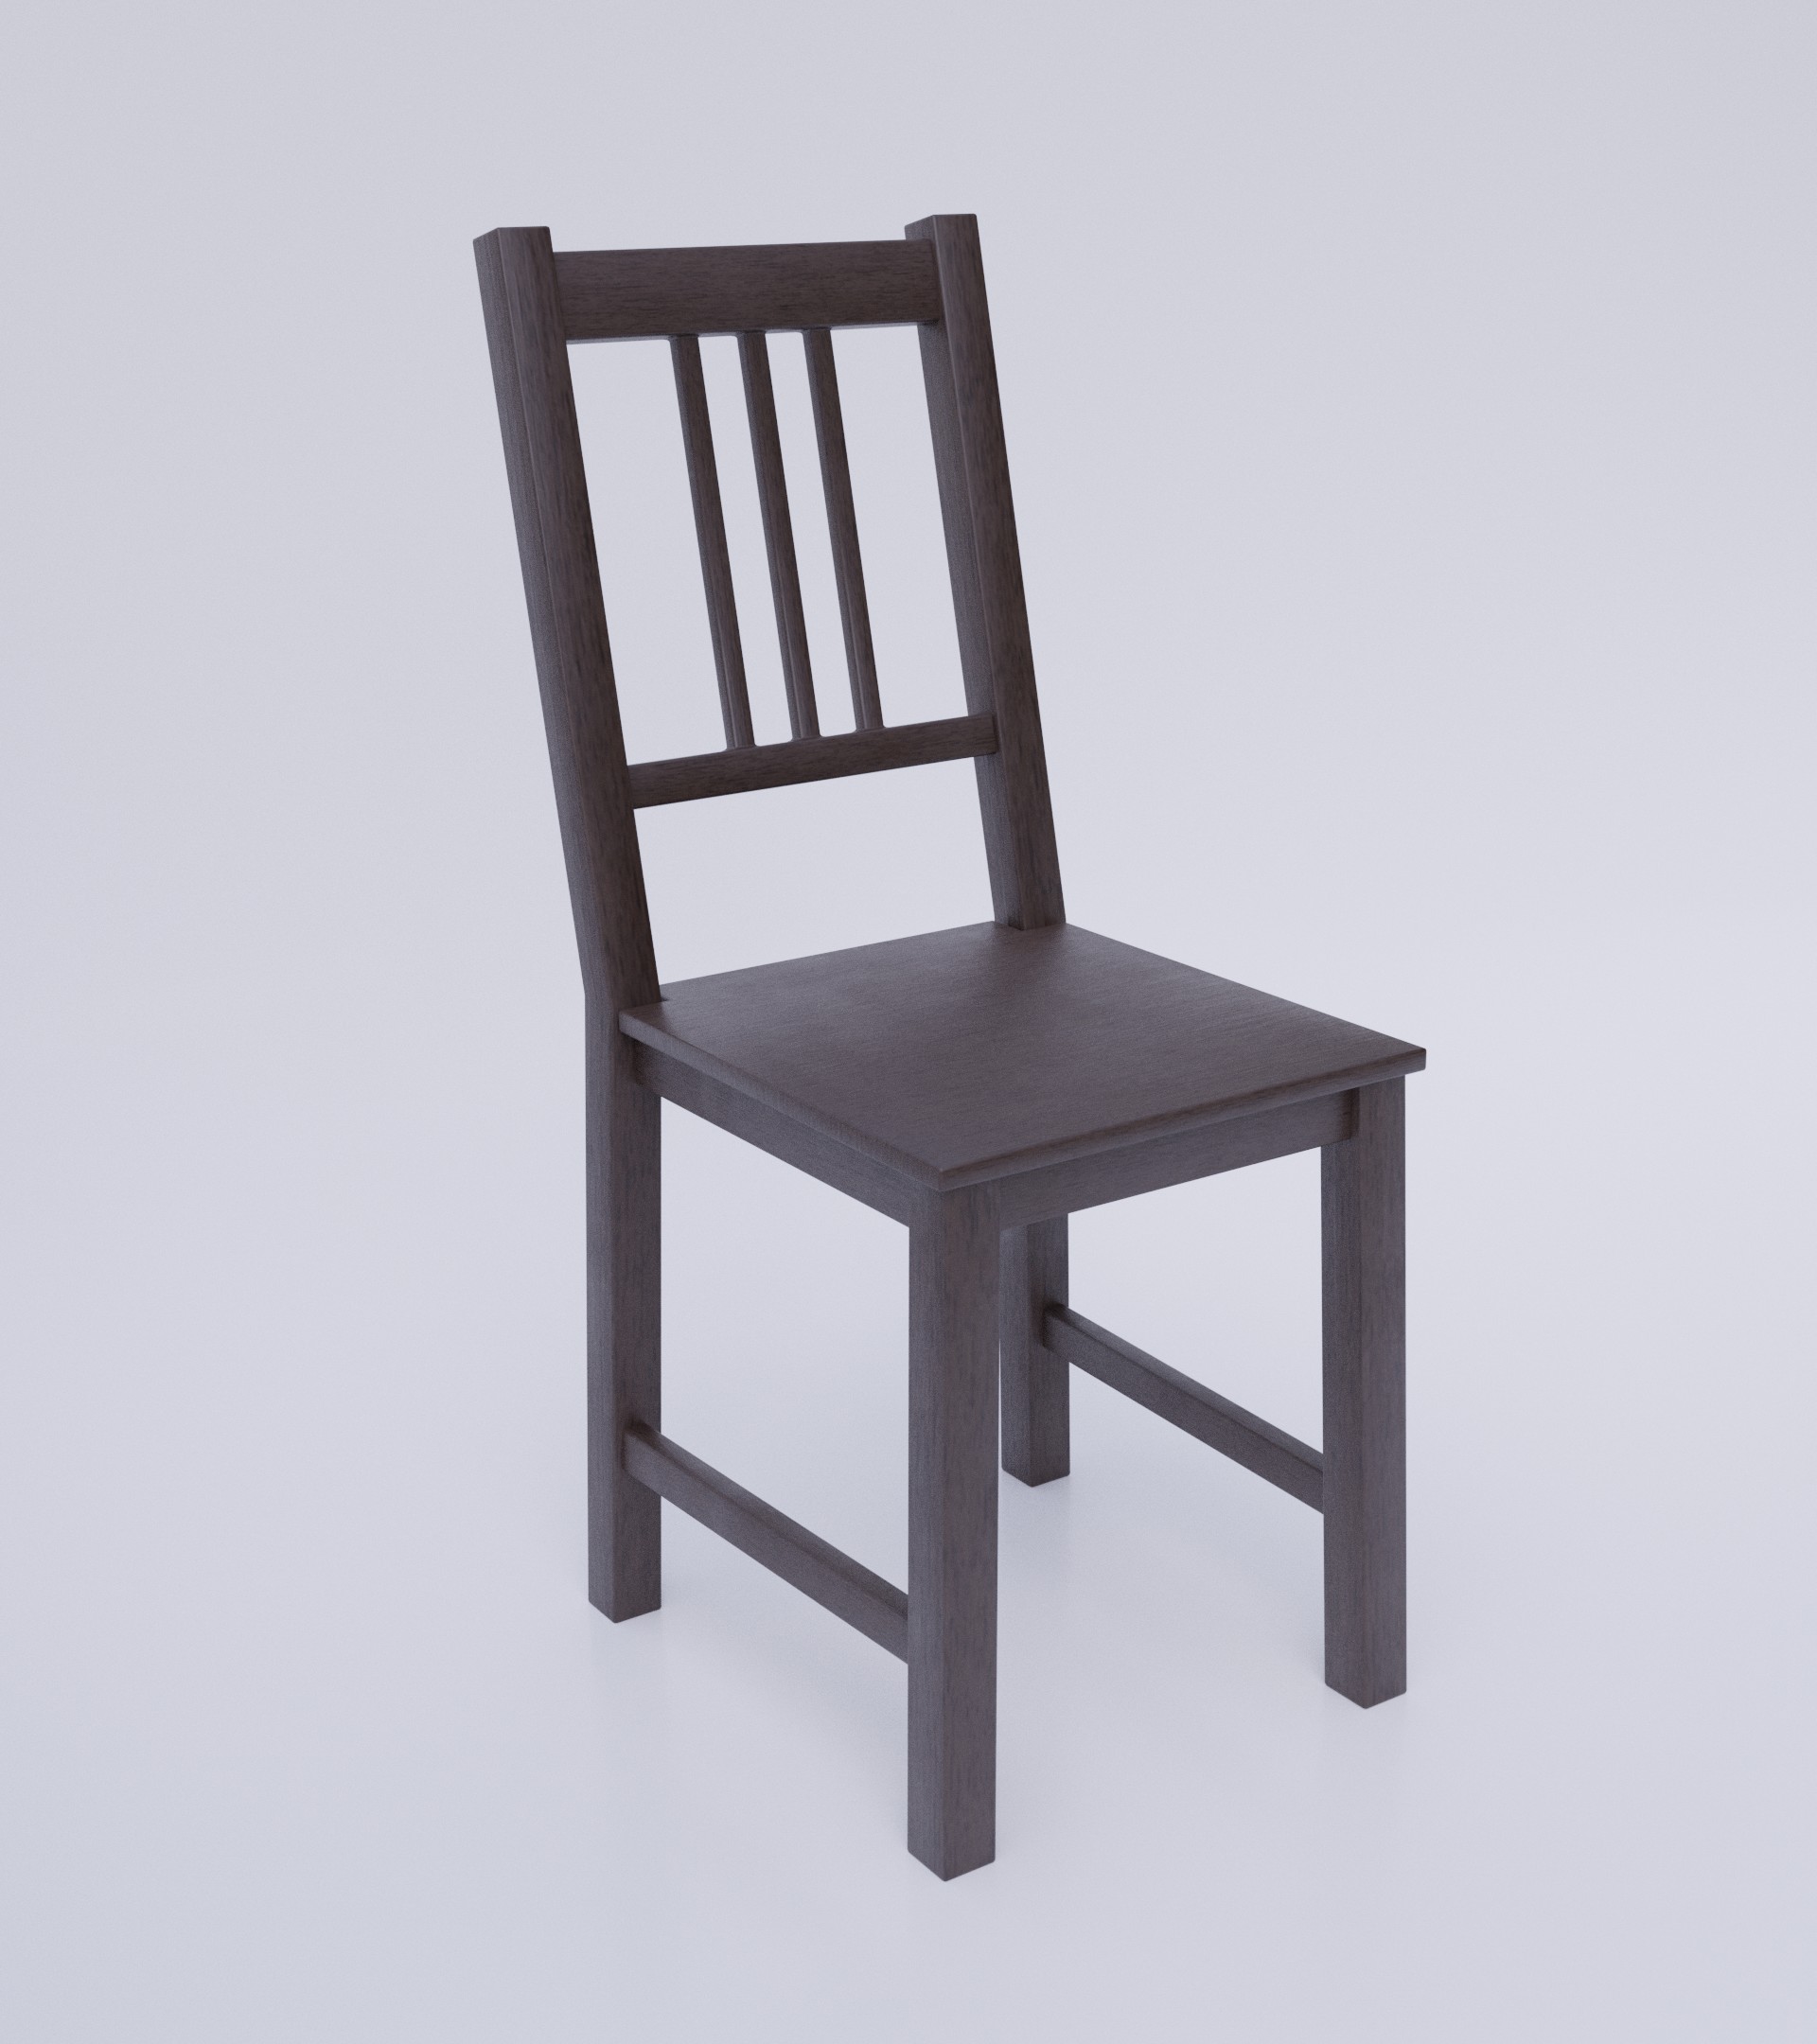 Simple Dark Wood Chair preview image 4